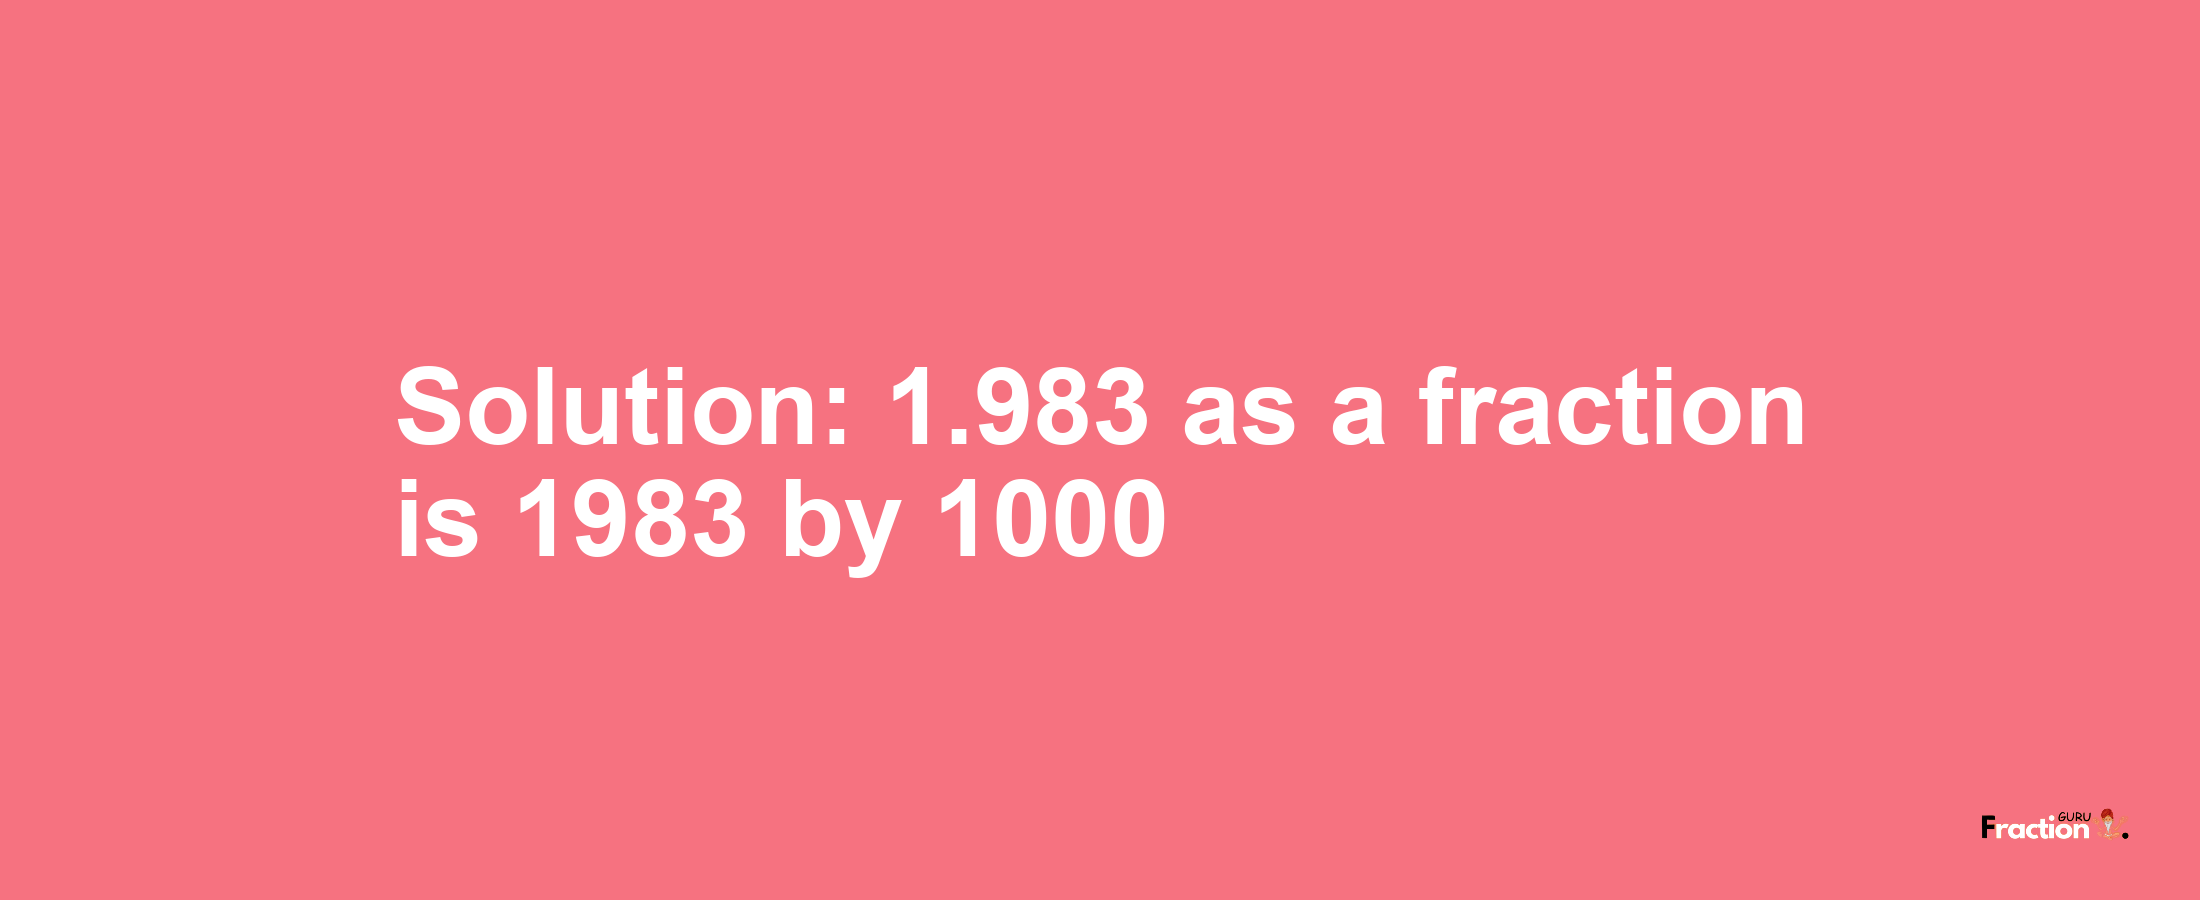 Solution:1.983 as a fraction is 1983/1000